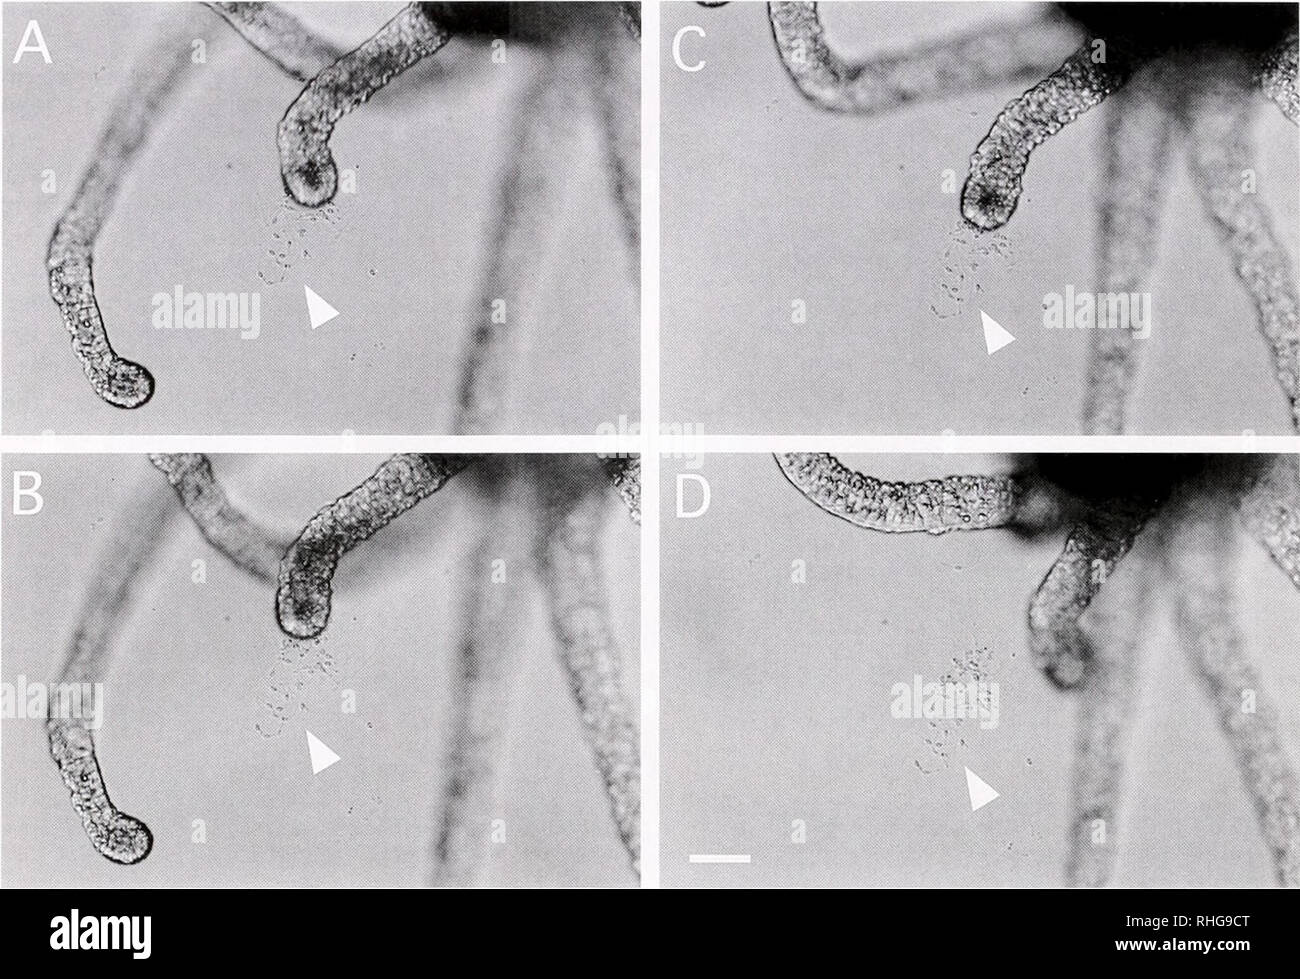 . The Biological bulletin. Biology; Zoology; Biology; Marine Biology. 264 K. YAMASHITA ET AL. Figure 6. Rubbing of the aboral tentacle tip with sinuous movement, followed by discharge and sticking of atrichous isorhiza nematocytes (arrowheads) on the glass surface during the settlement of an aetinula larva. The elapsed time from A to D was about 5 min. A-D are same magnification. Bar = 50 ;um. 1.9). which were not deployed in the tentacle tips. In the tentacles of 2-4-h-old larvae four types of nematocytes, namely atrichous isorhiza (AI). stenotele (S), desmoneme (D). and microbasic mastigopho Stock Photo